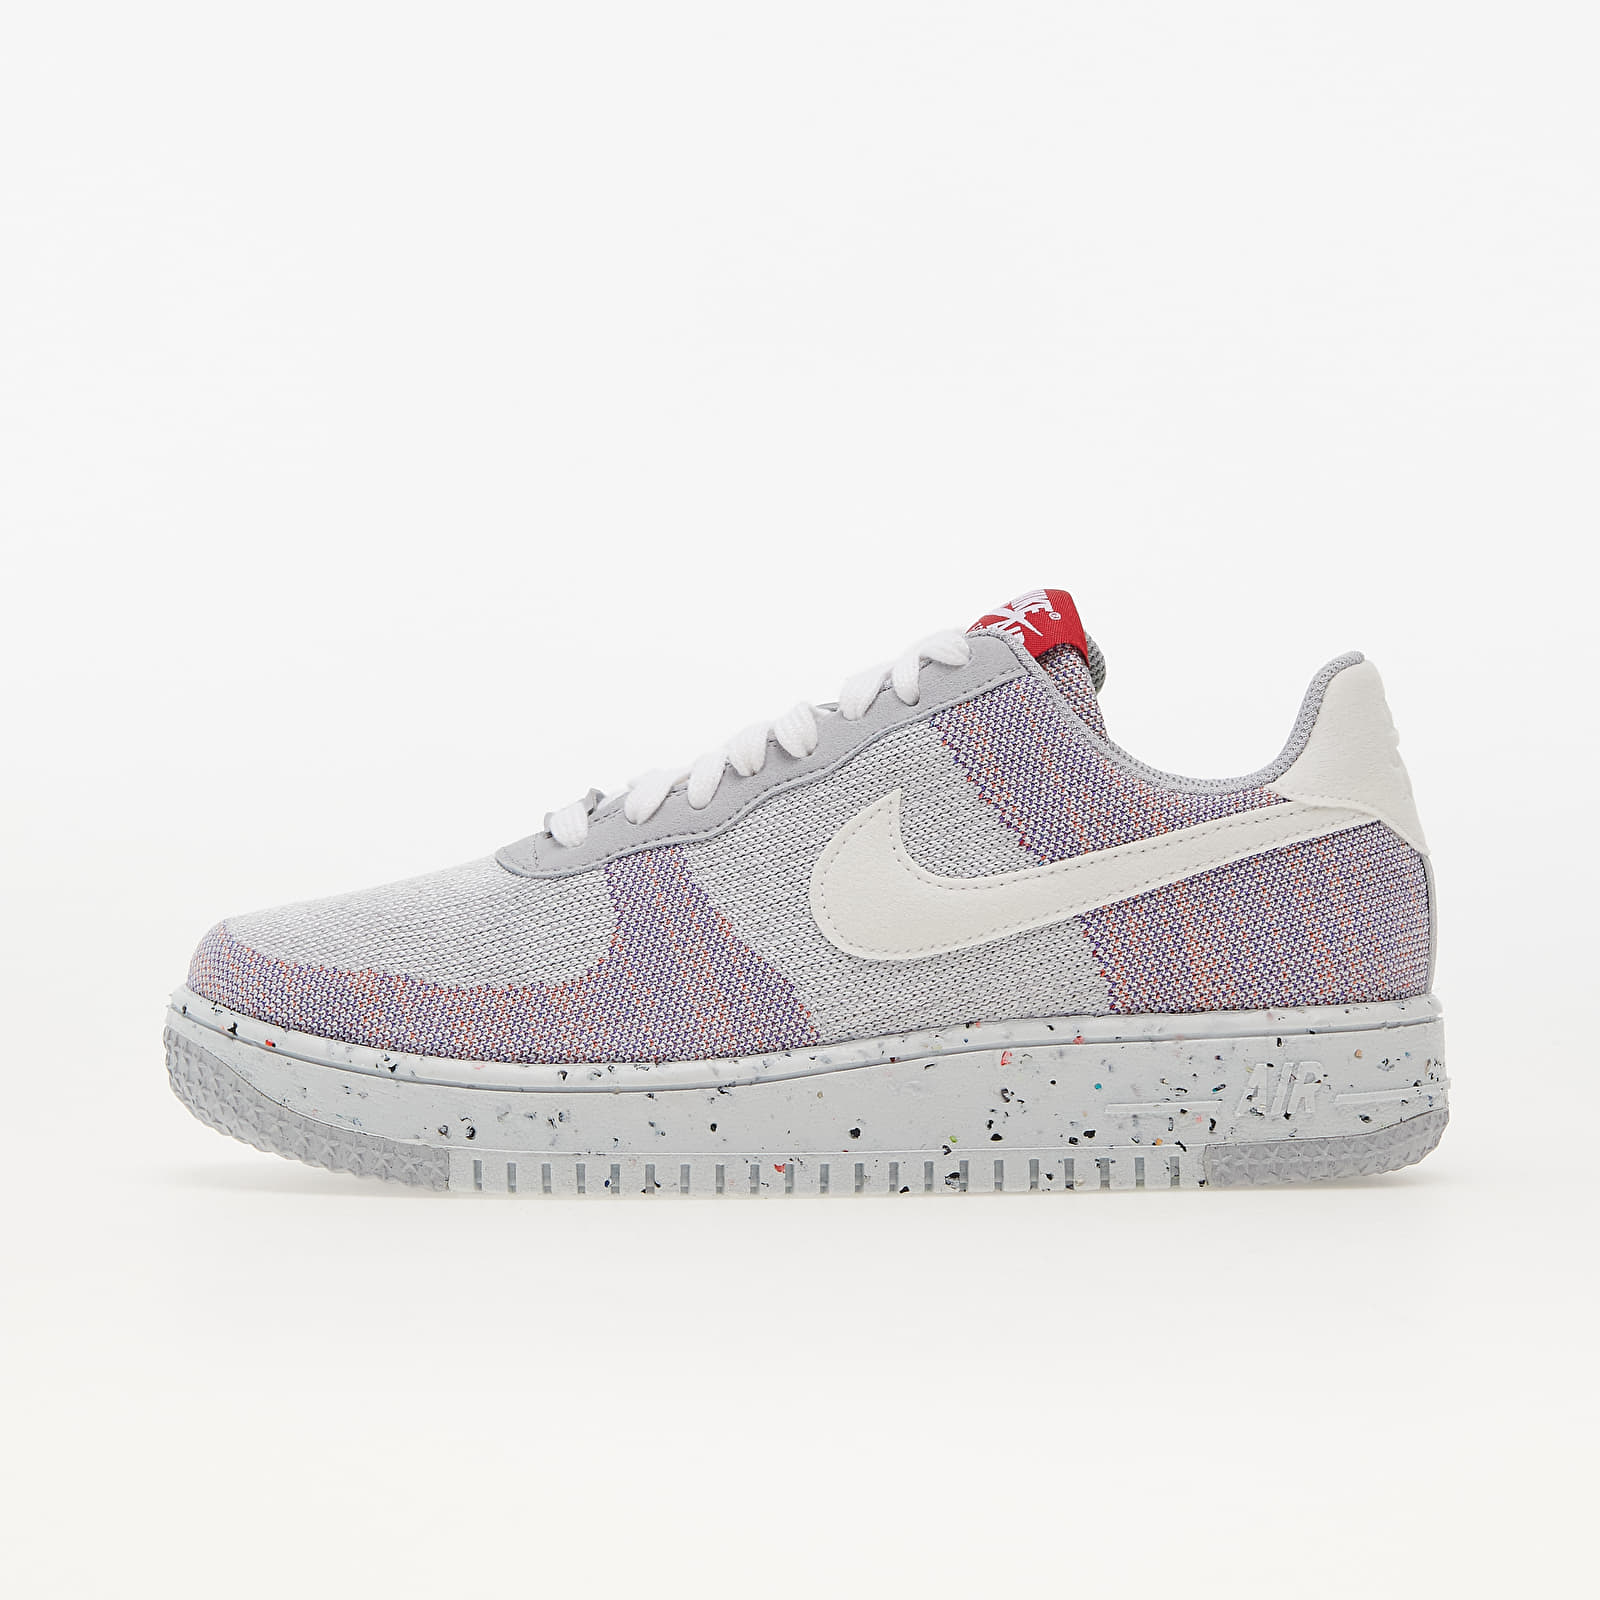 Pánske tenisky a topánky Nike Air Force 1 Crater FlyKnit Wolf Grey/ White-Pure Platinum-Gym Red